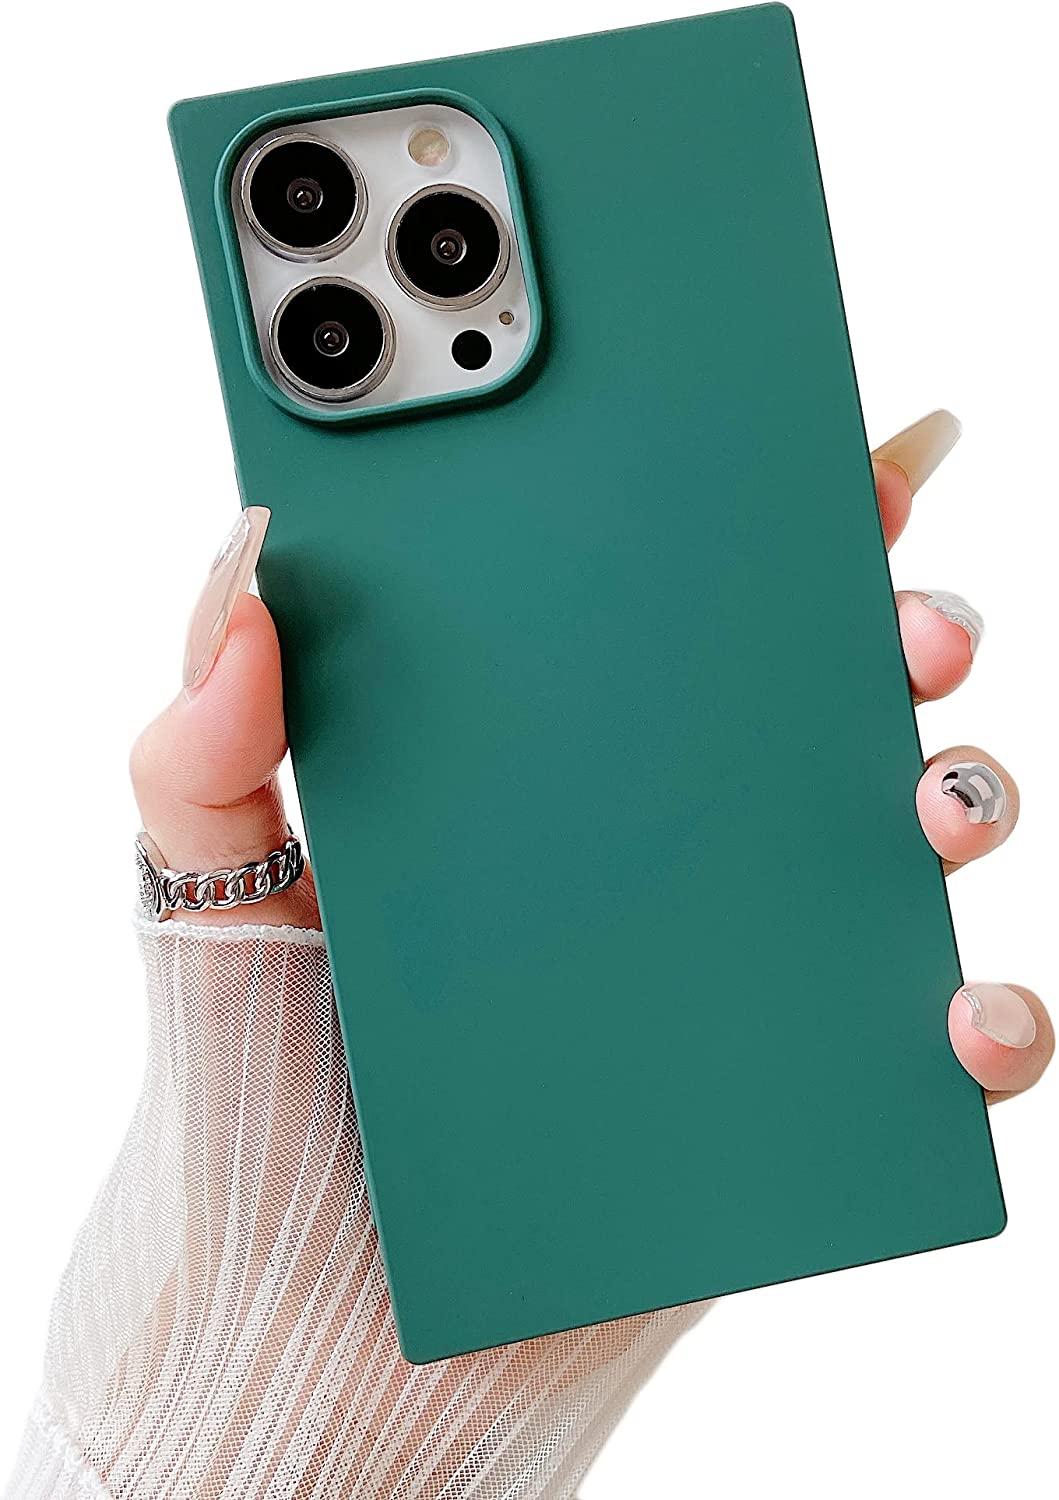 Cocomii Square iPhone 11 Pro Max Case - Square Silicone - Slim - Lightweight - Matte - Silky Soft Touch Silicone - Microfiber Lining - Cover Compatible with Apple iPhone 11 Pro Max 6.5